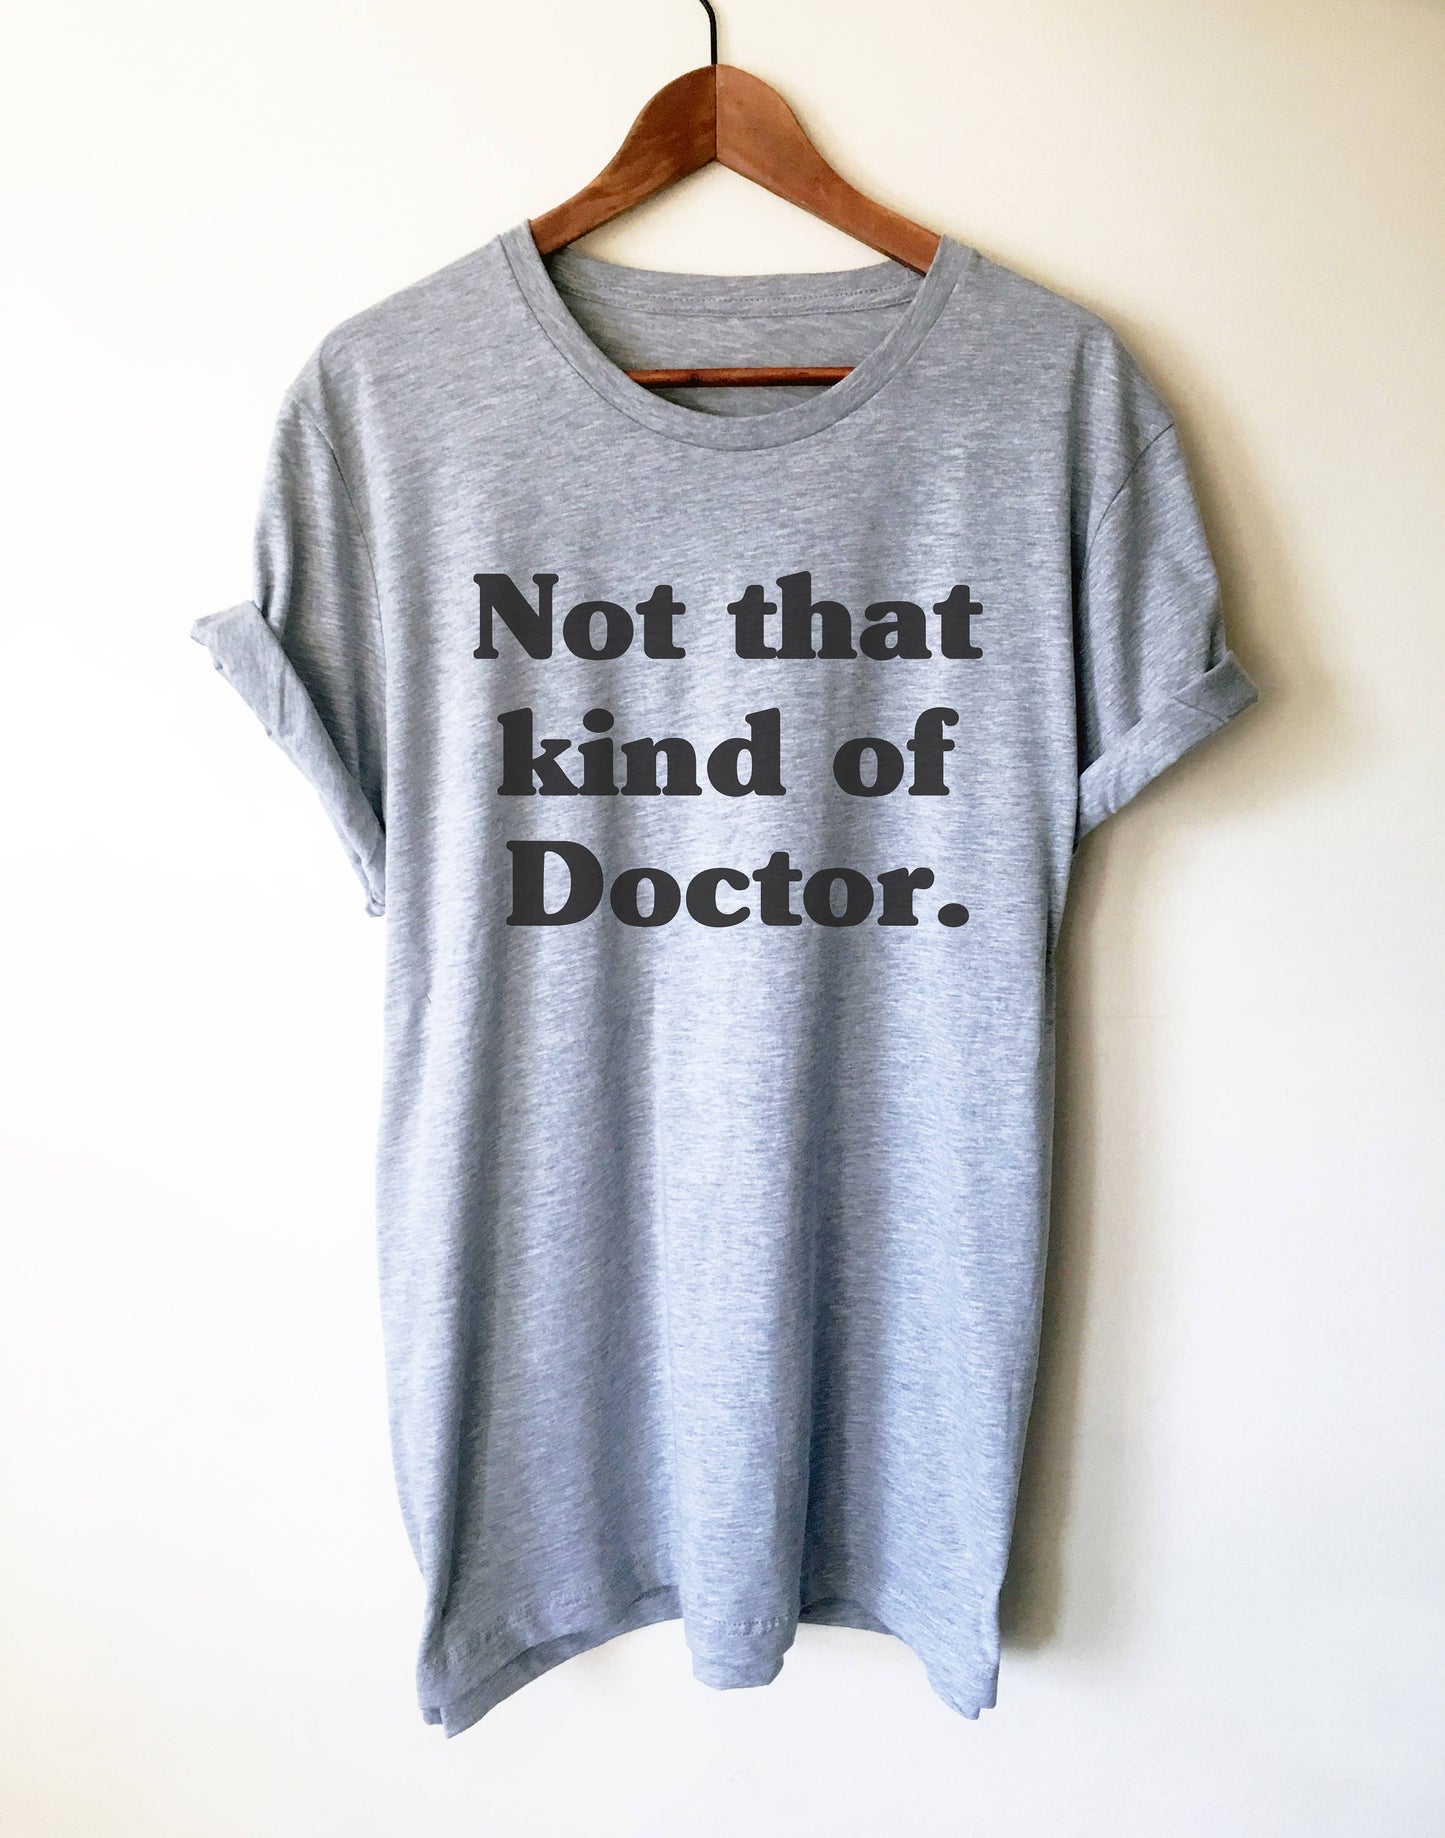 Not That Kind Of Doctor Unisex Shirt - phd graduation gift - Doctor Gift For Her - Funny Doctor T-Shirt - Unique Doctor Shirt -